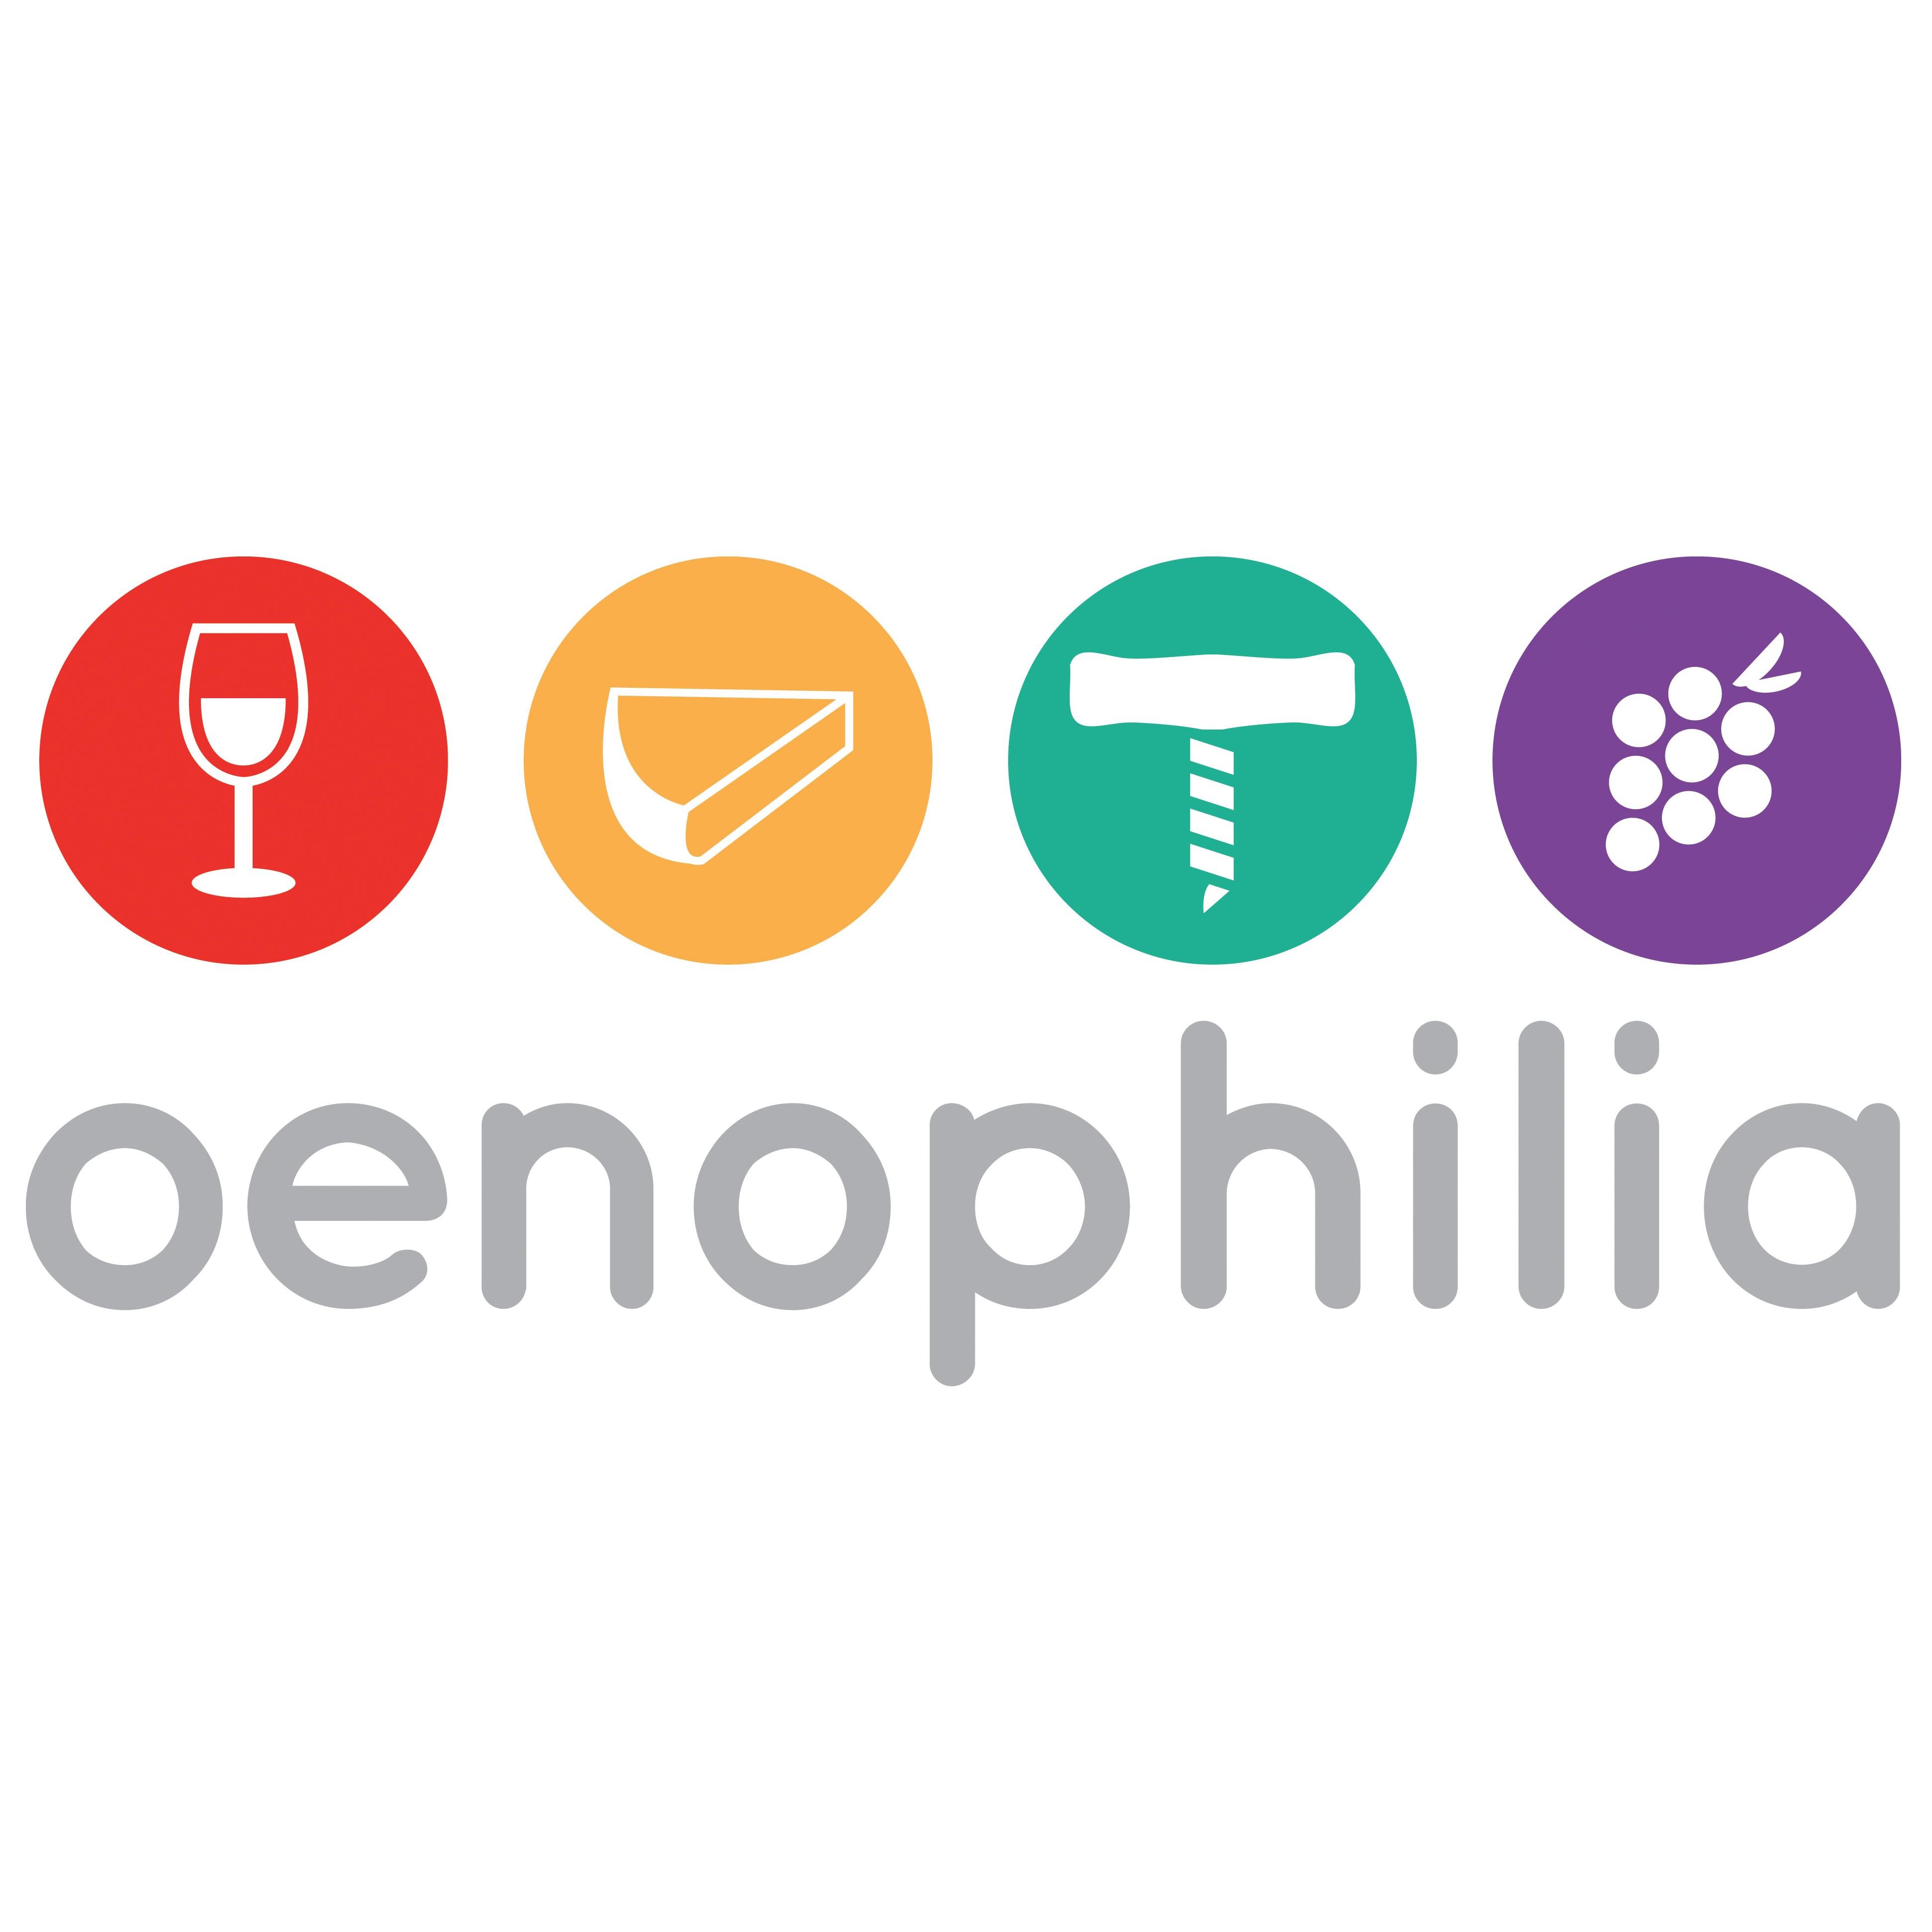 We are Oenophilia (pronounced “ee-no-feel-ee-ya”) and we specialize in the finest wine and bar accessories.